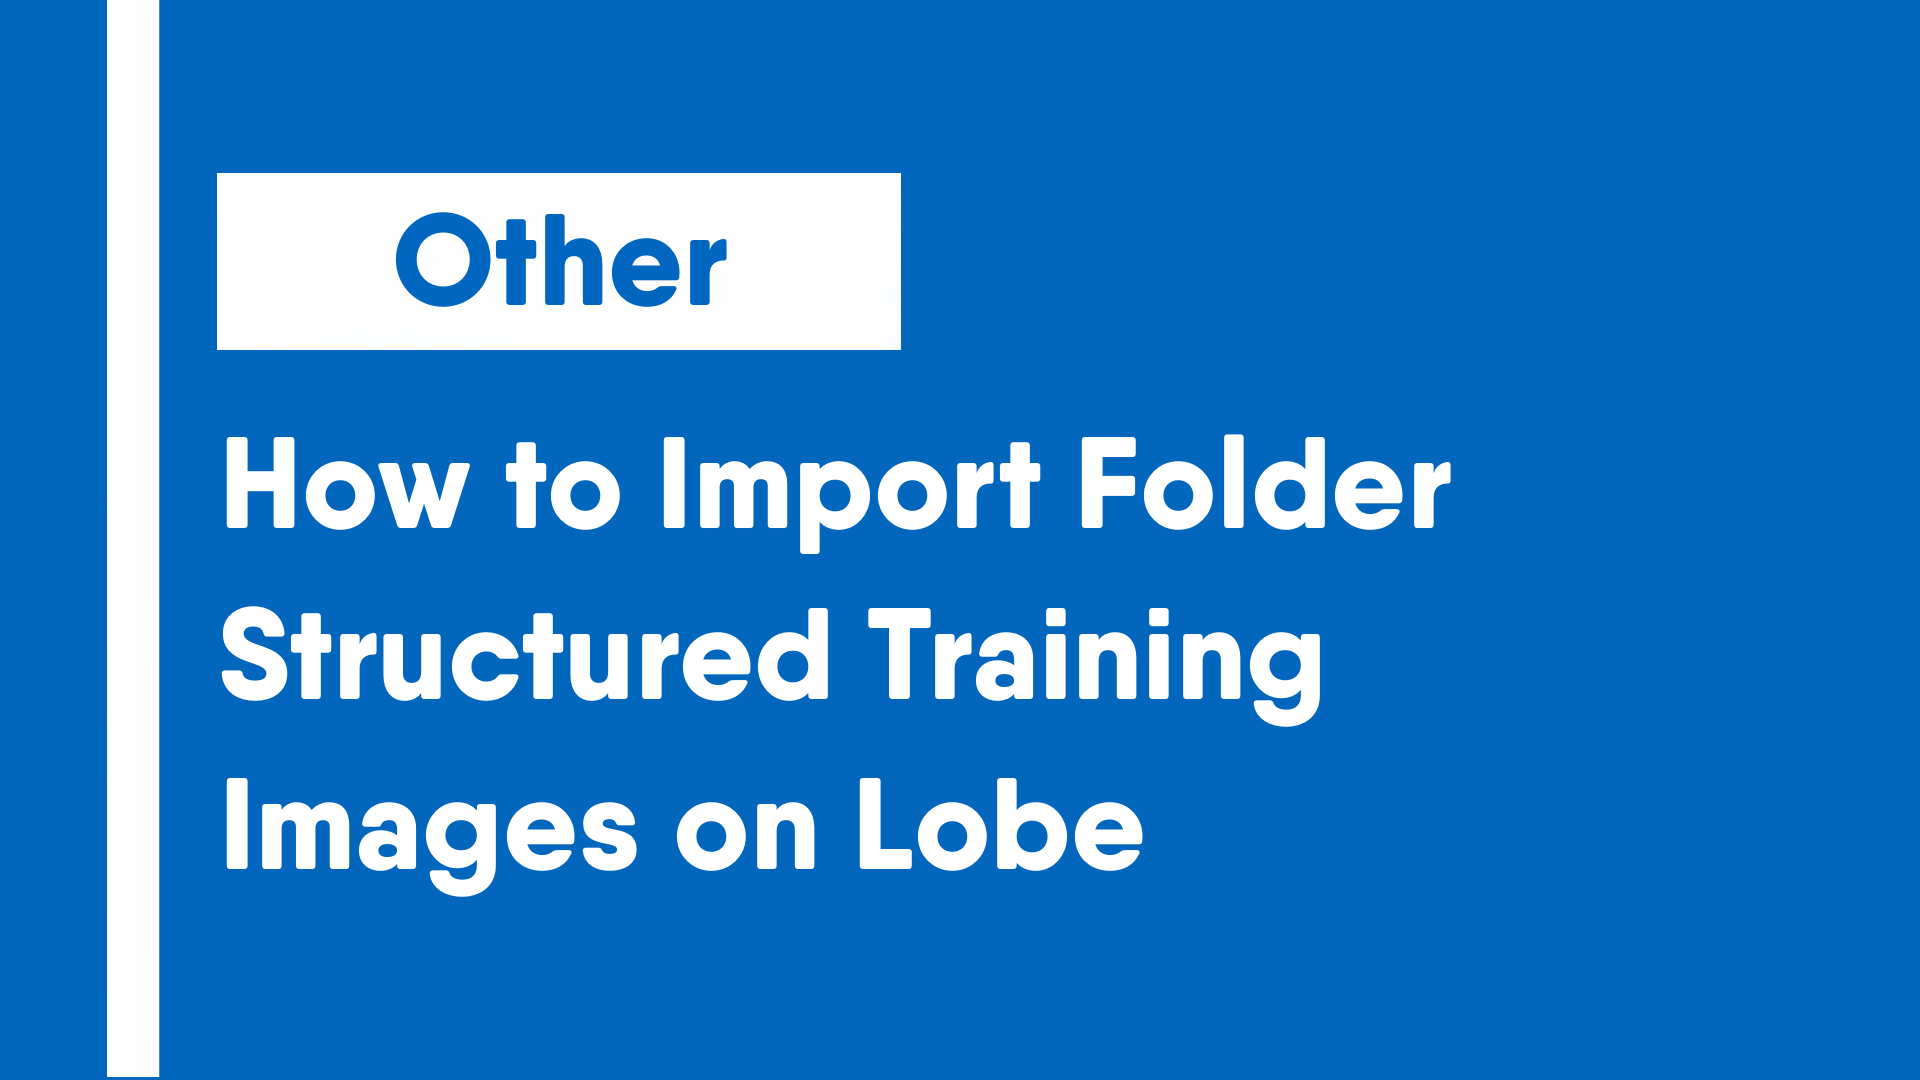 How to Import Folder Structured Training Images on Lobe